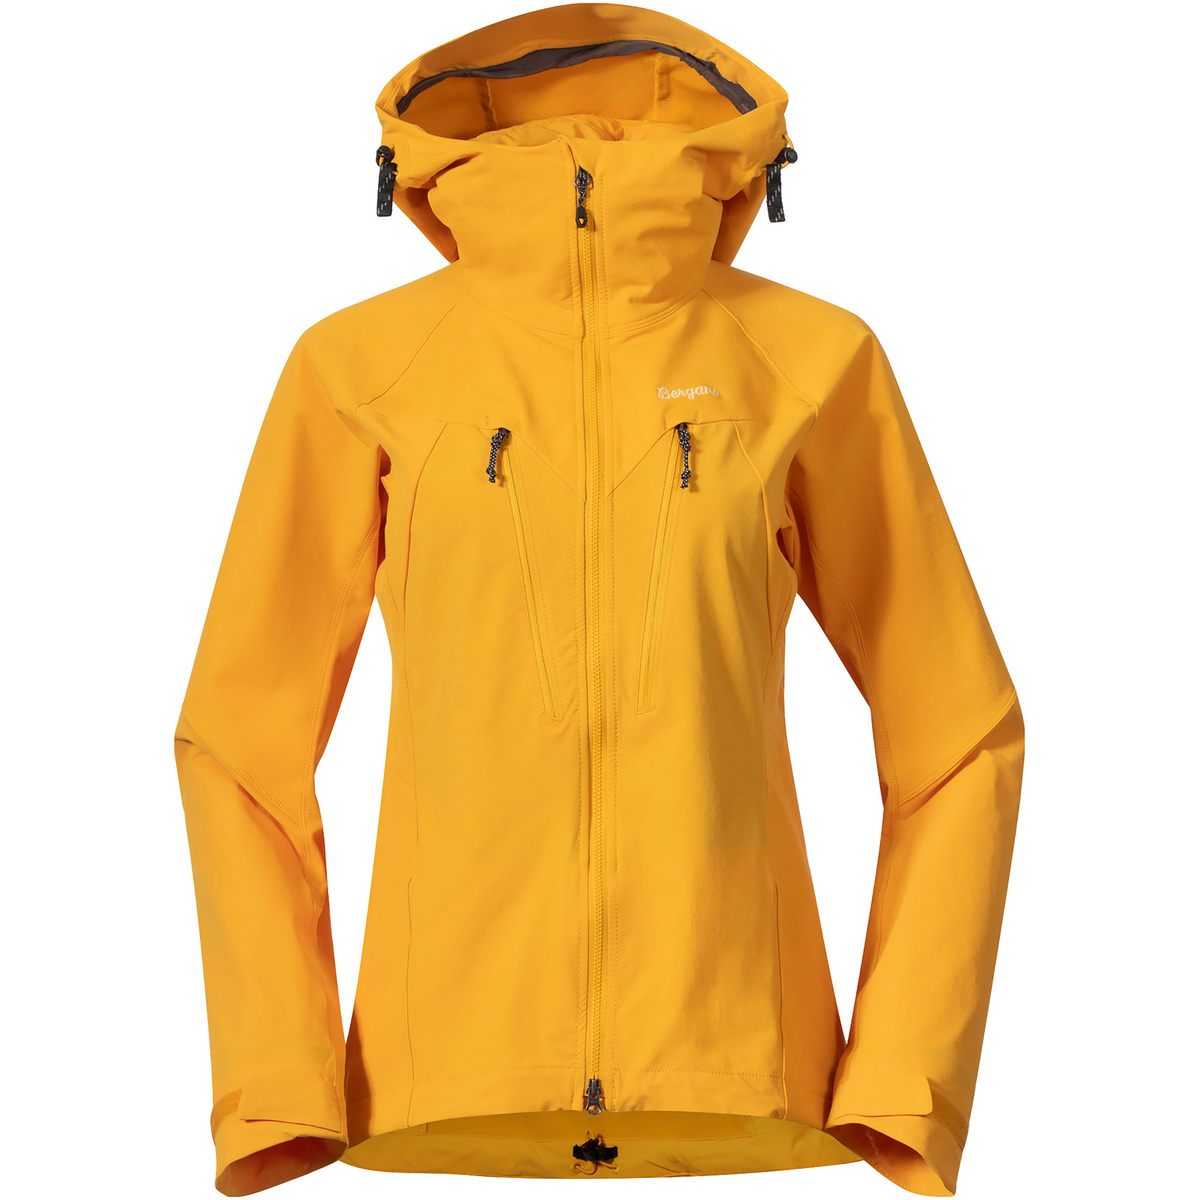 Image of Bergans Donna Giacca softshell Tind